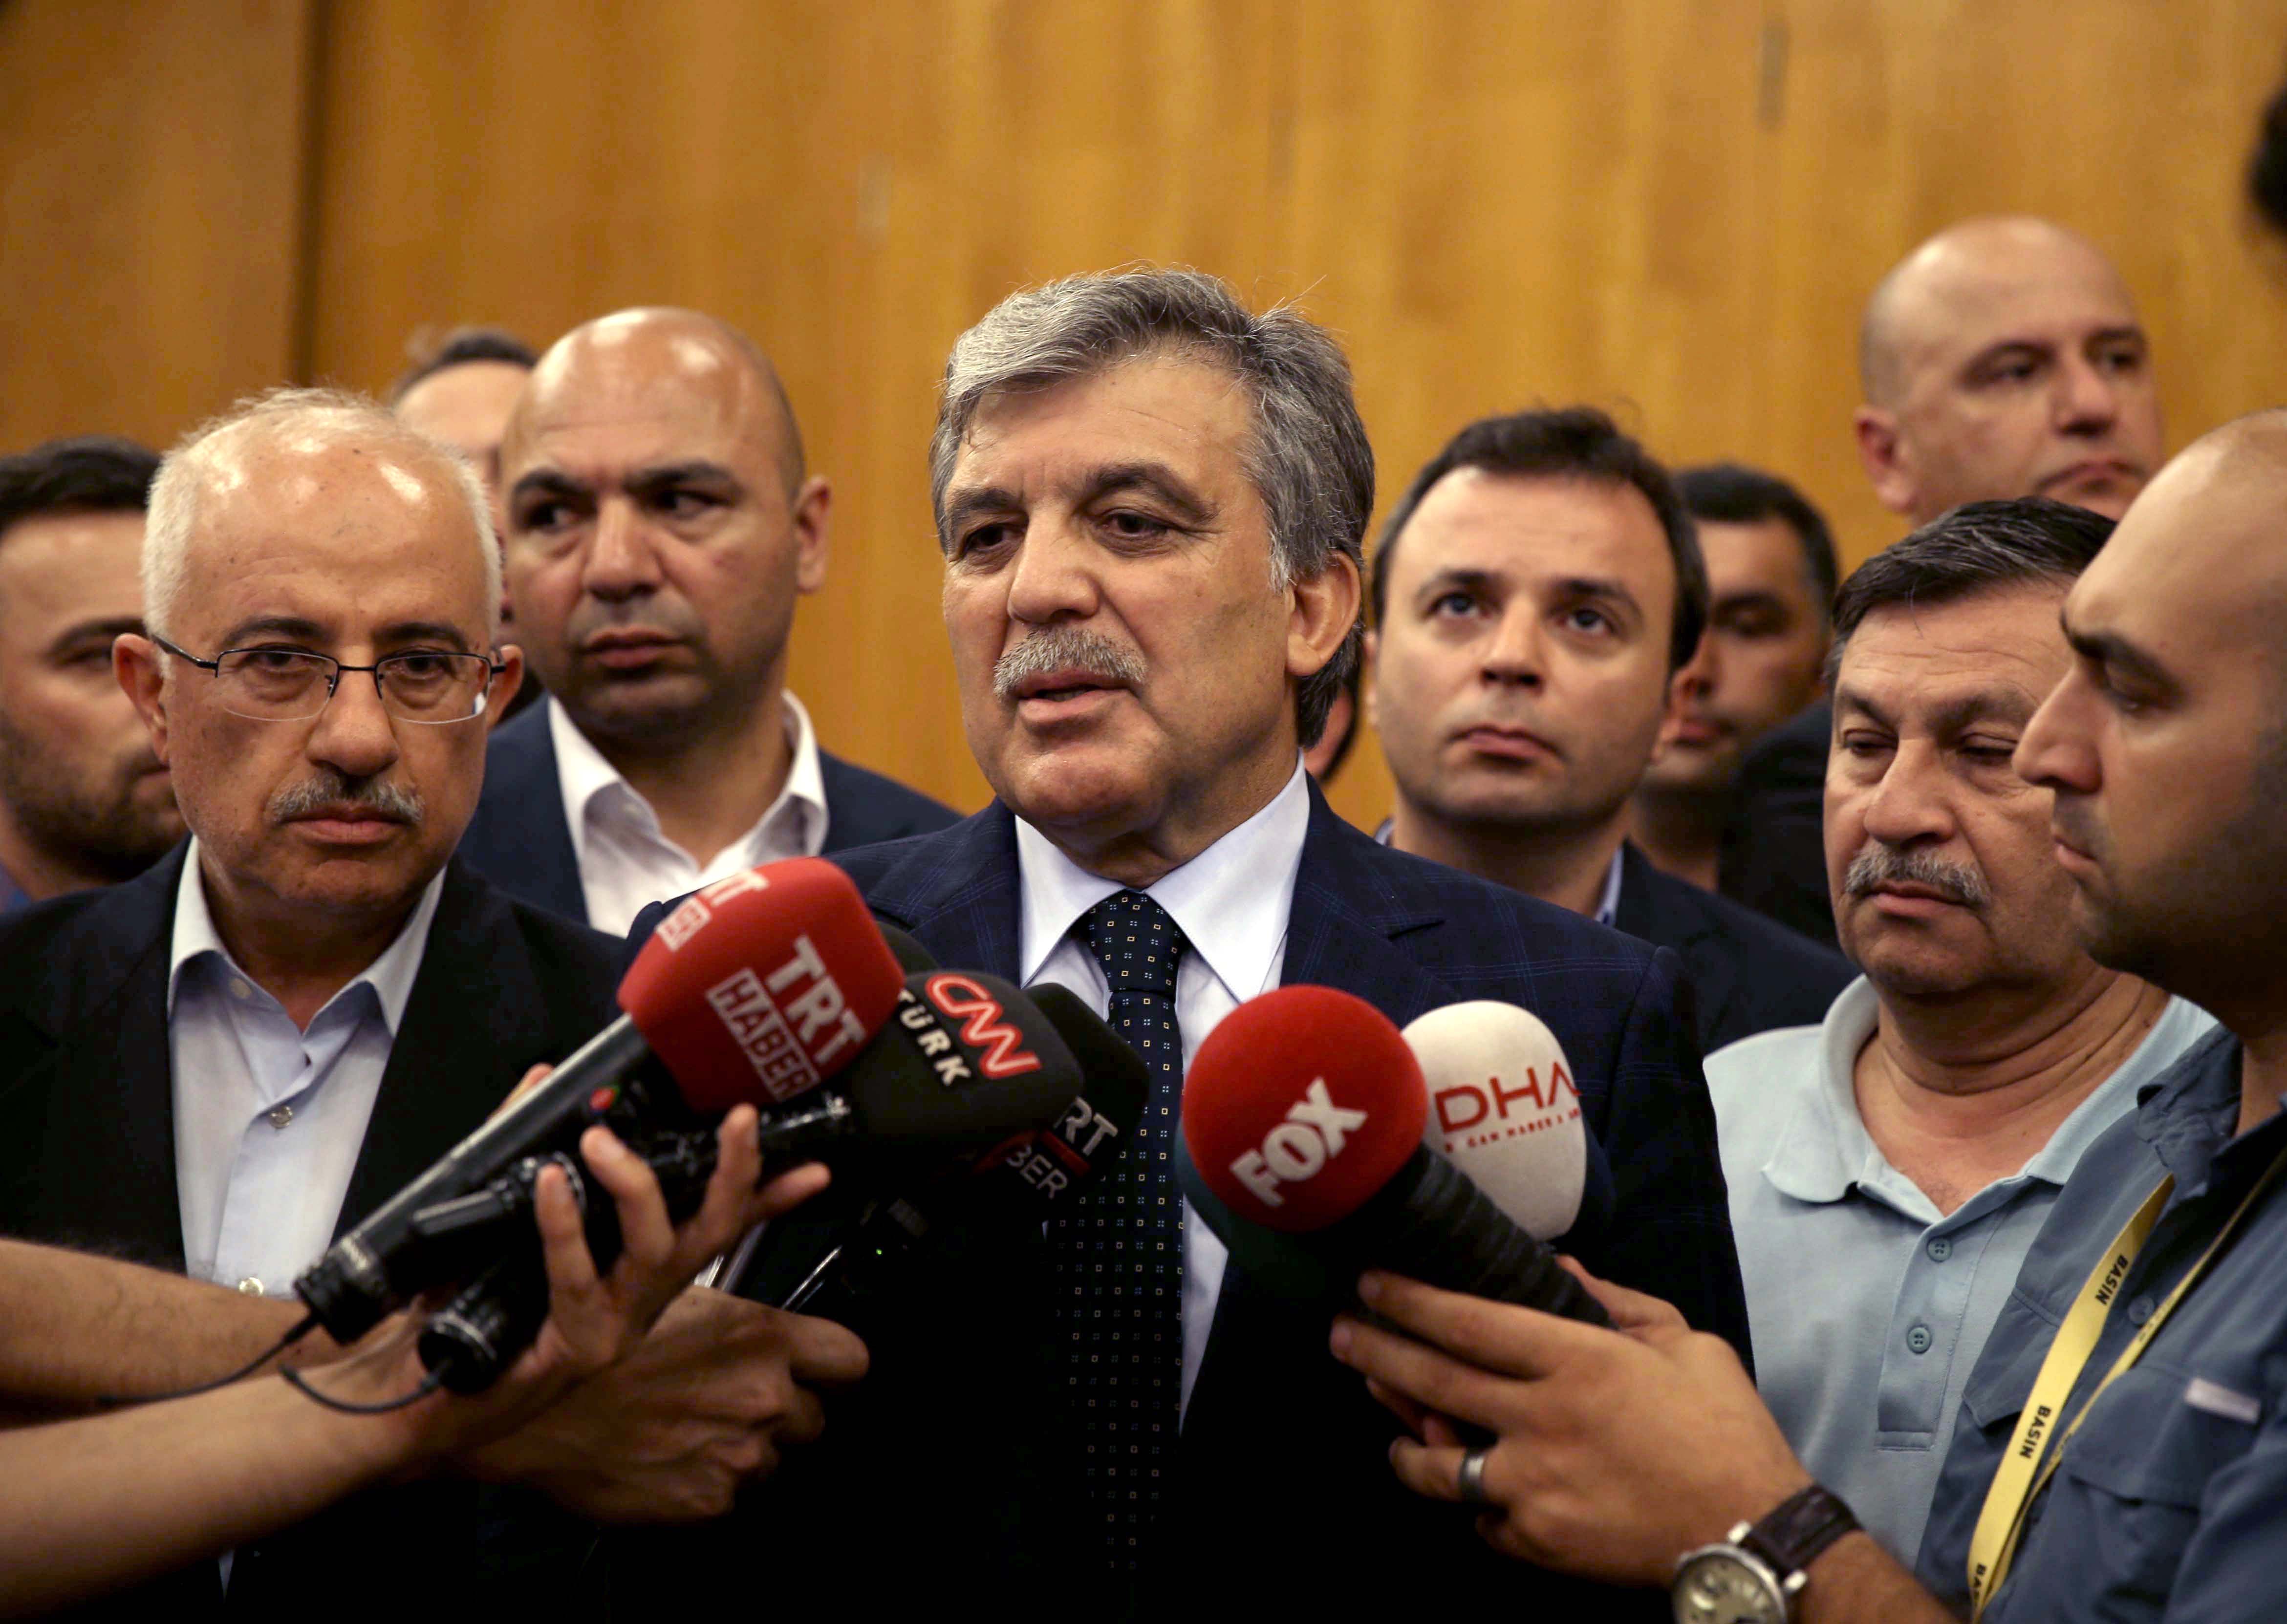 Former President Abdullah Gül also arrived at the Atatürk Airport State Guesthouse to meet with President Erdoğan. Gül made a statement to the press after the meeting.